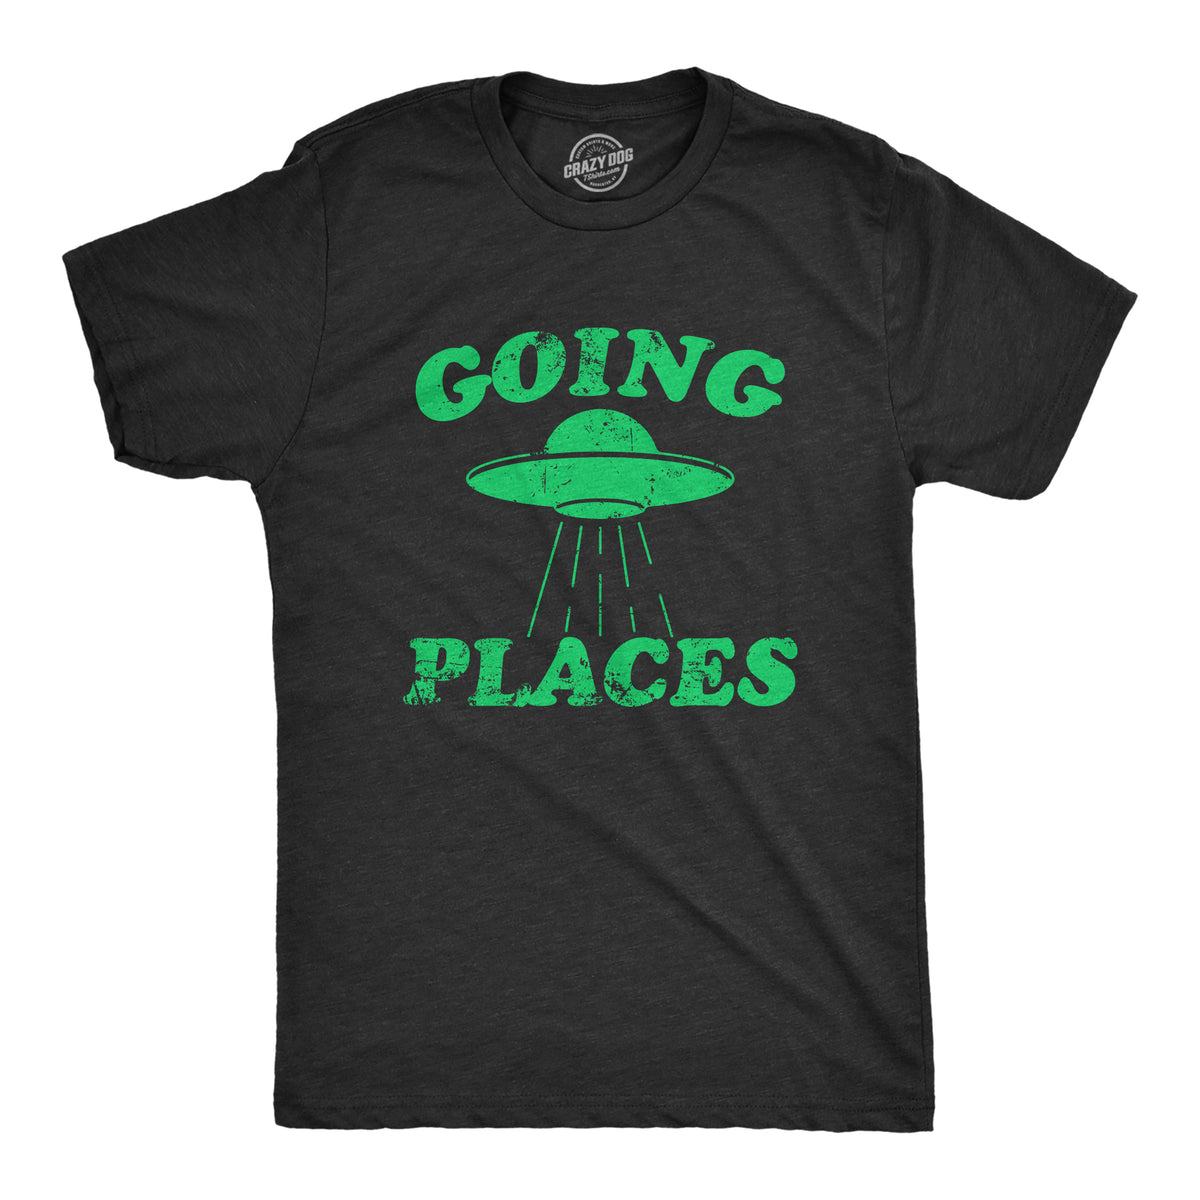 Funny Heather Black - PLACES Going Places Mens T Shirt Nerdy sarcastic Tee